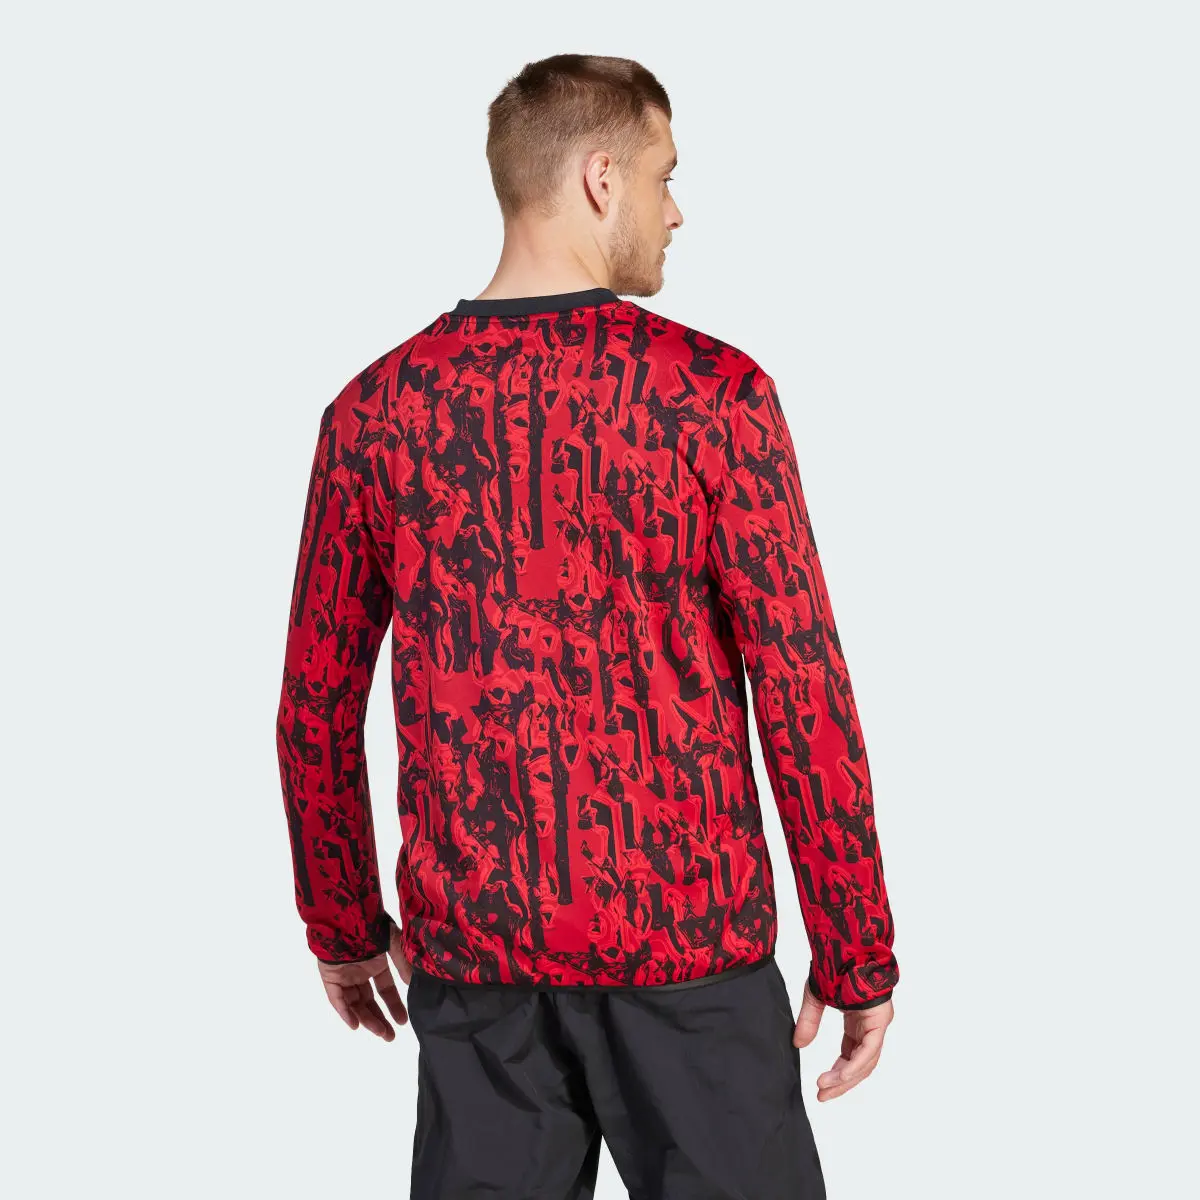 Adidas Manchester United Pre-Match Warm Top. 3